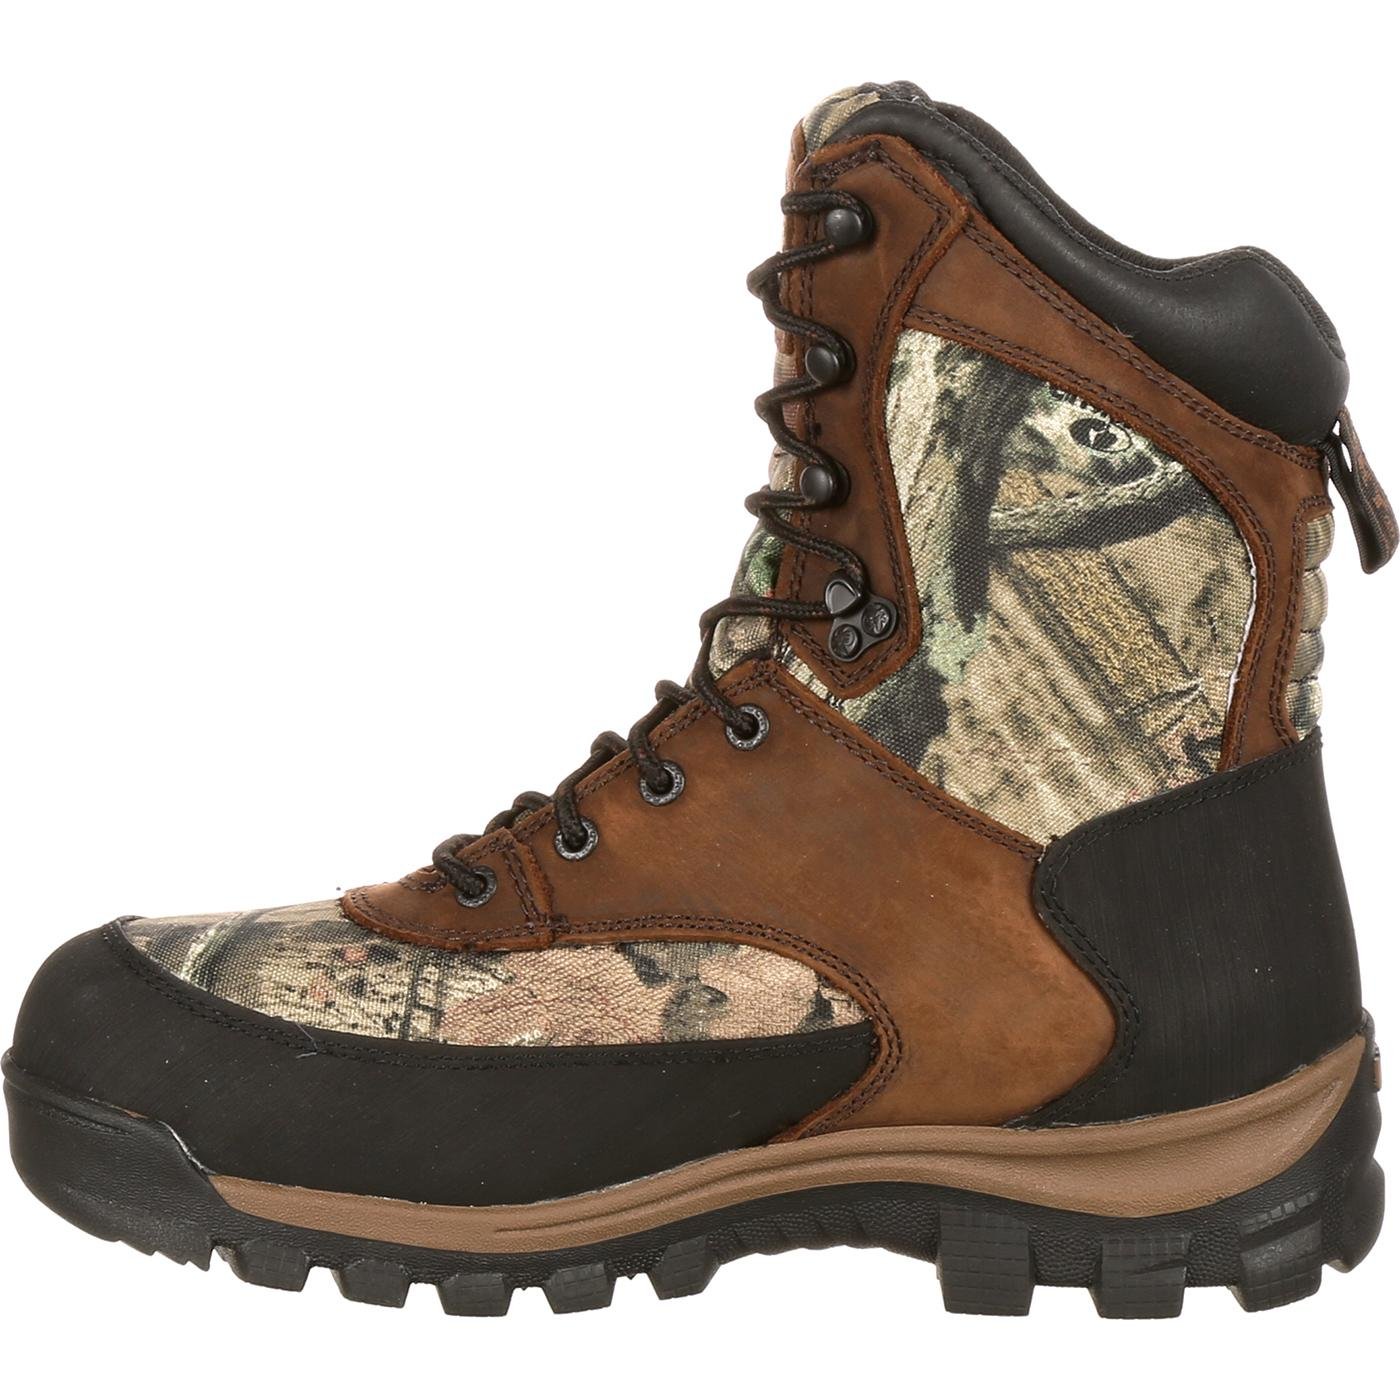 Rocky Core Waterproof Insulated Outdoor Boot - Style #4755